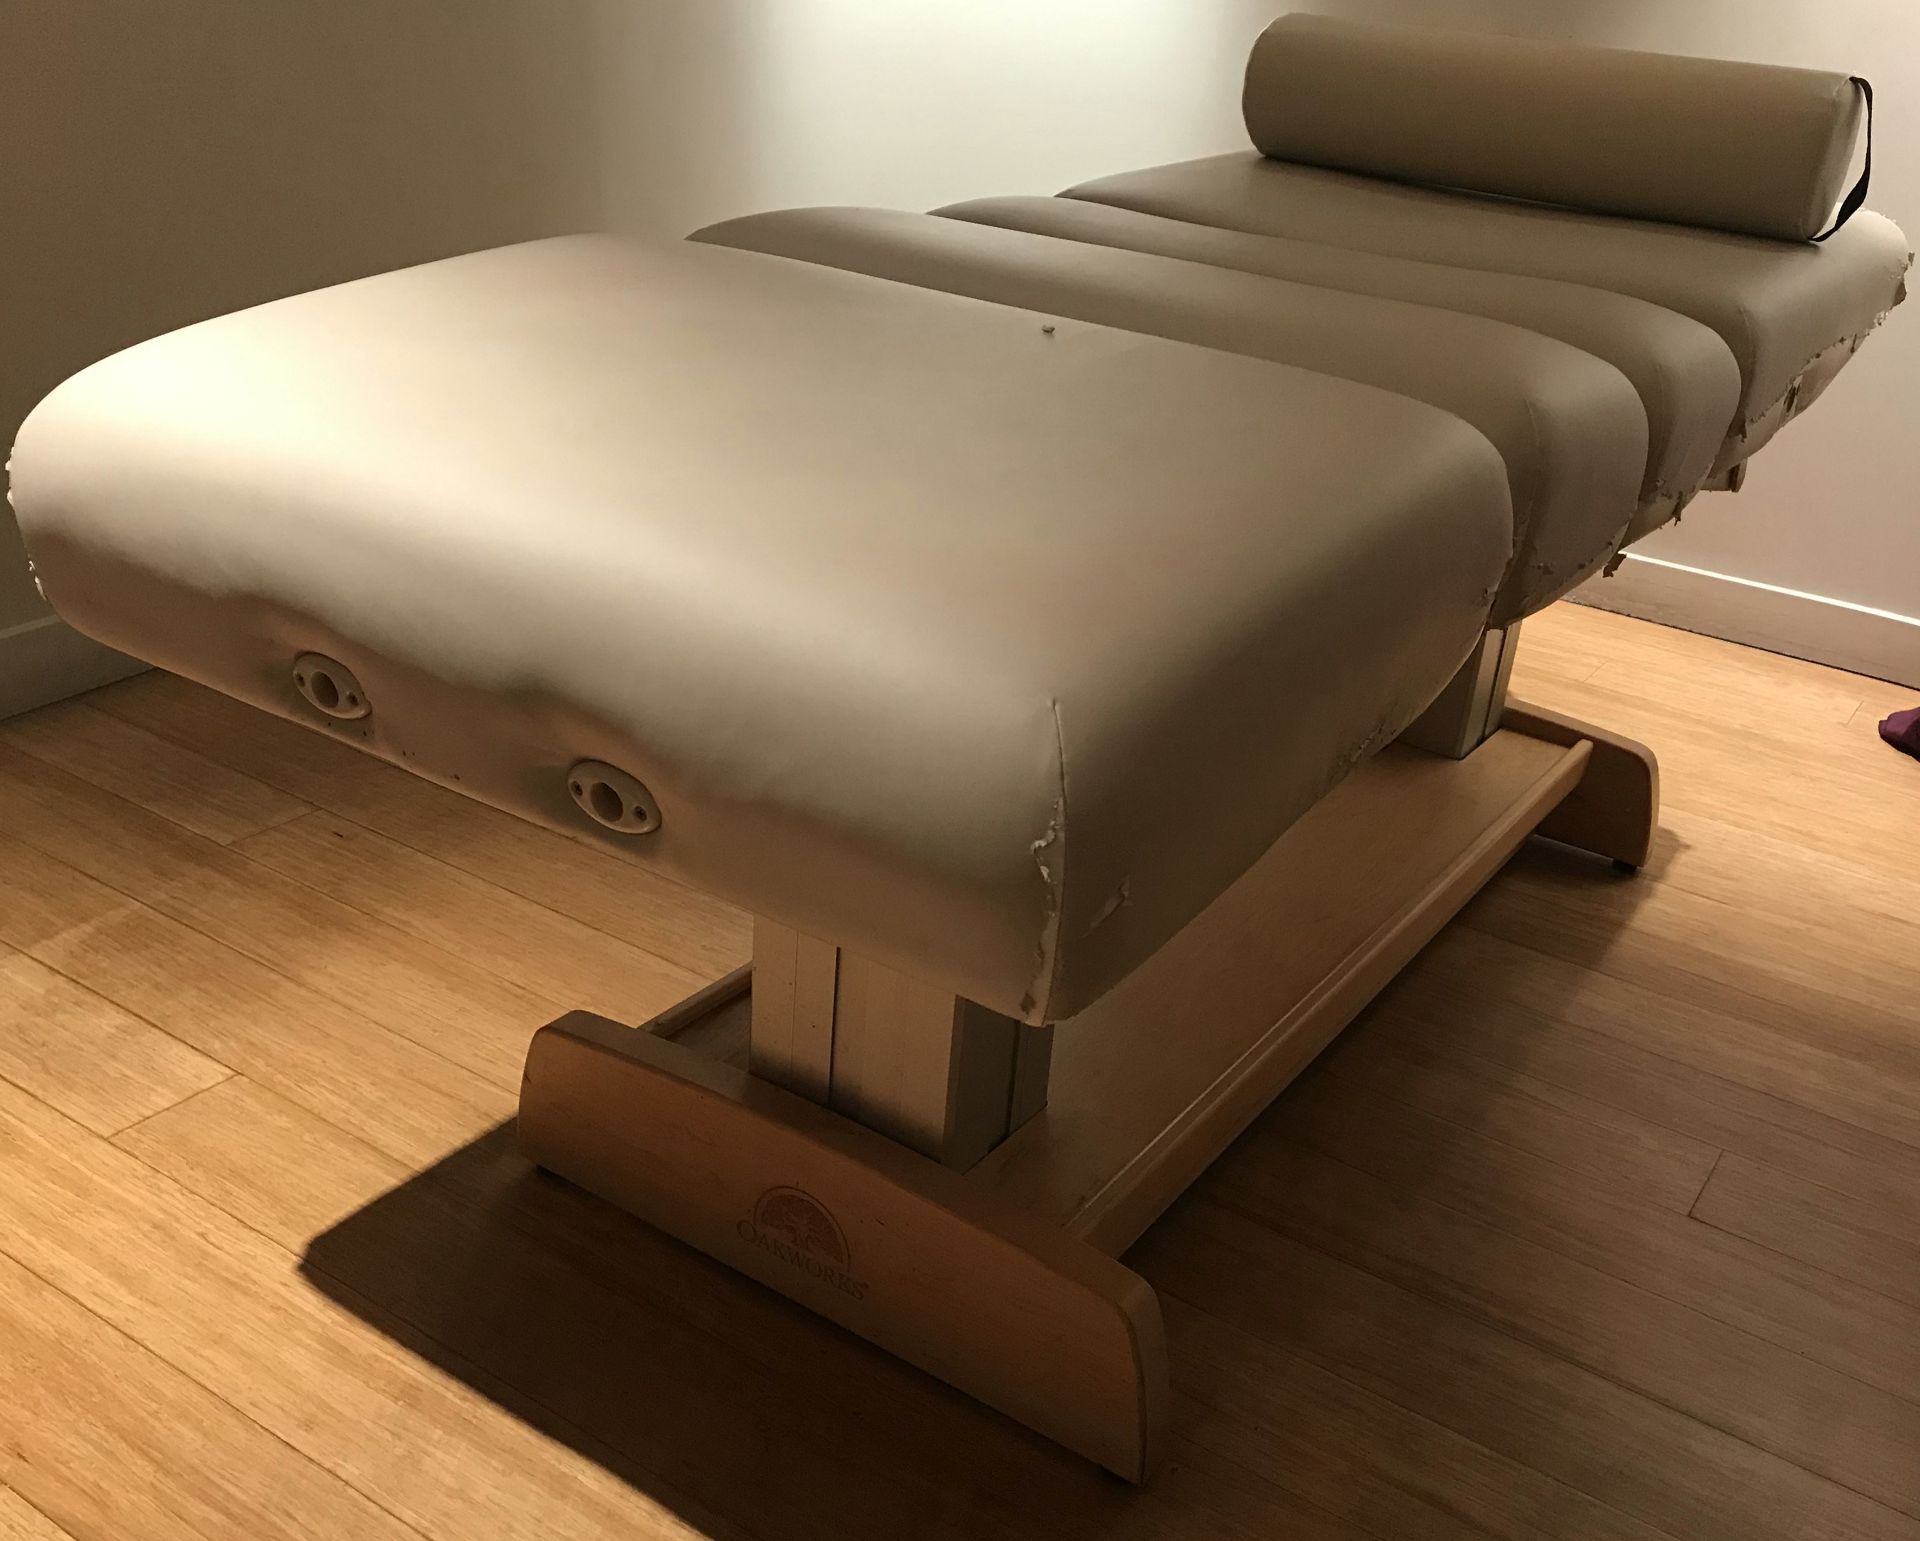 1 x Oakworks Clinician Electric-Hydraulic Massage Table With Footpedal and Linak HBWO Remote Control - Image 9 of 11